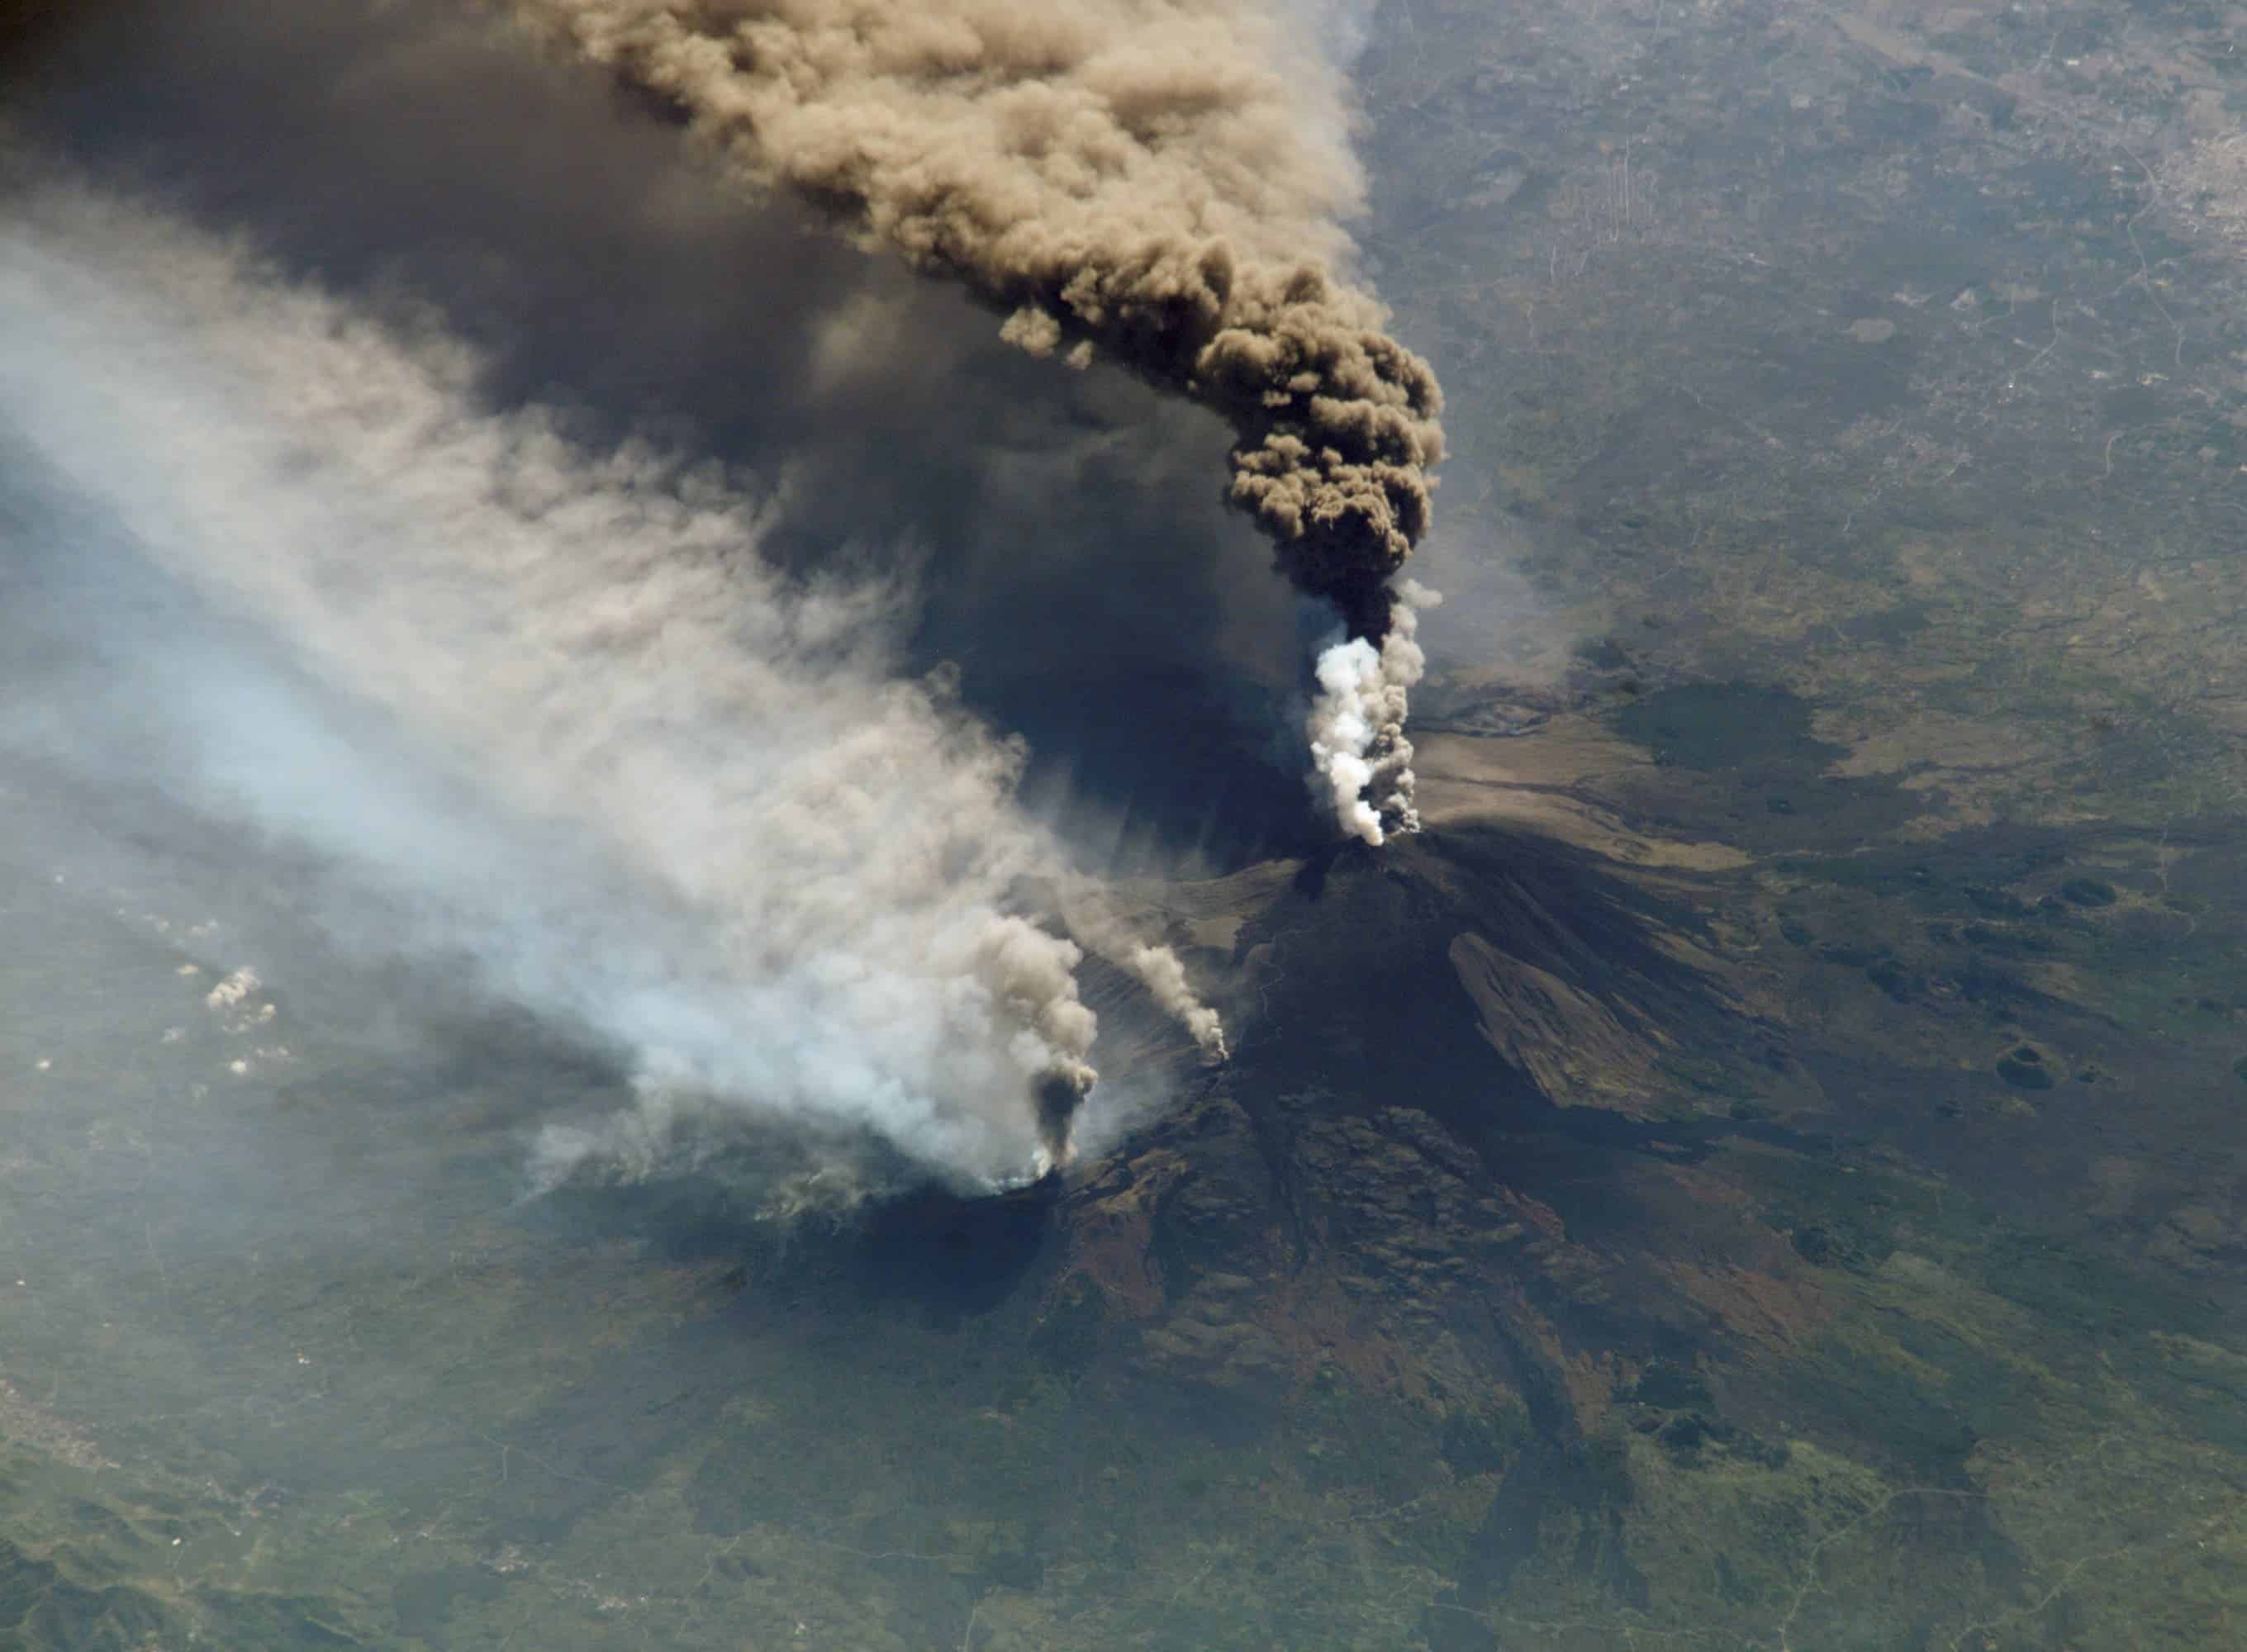 An Etna eruption as seen from the International Space Station.